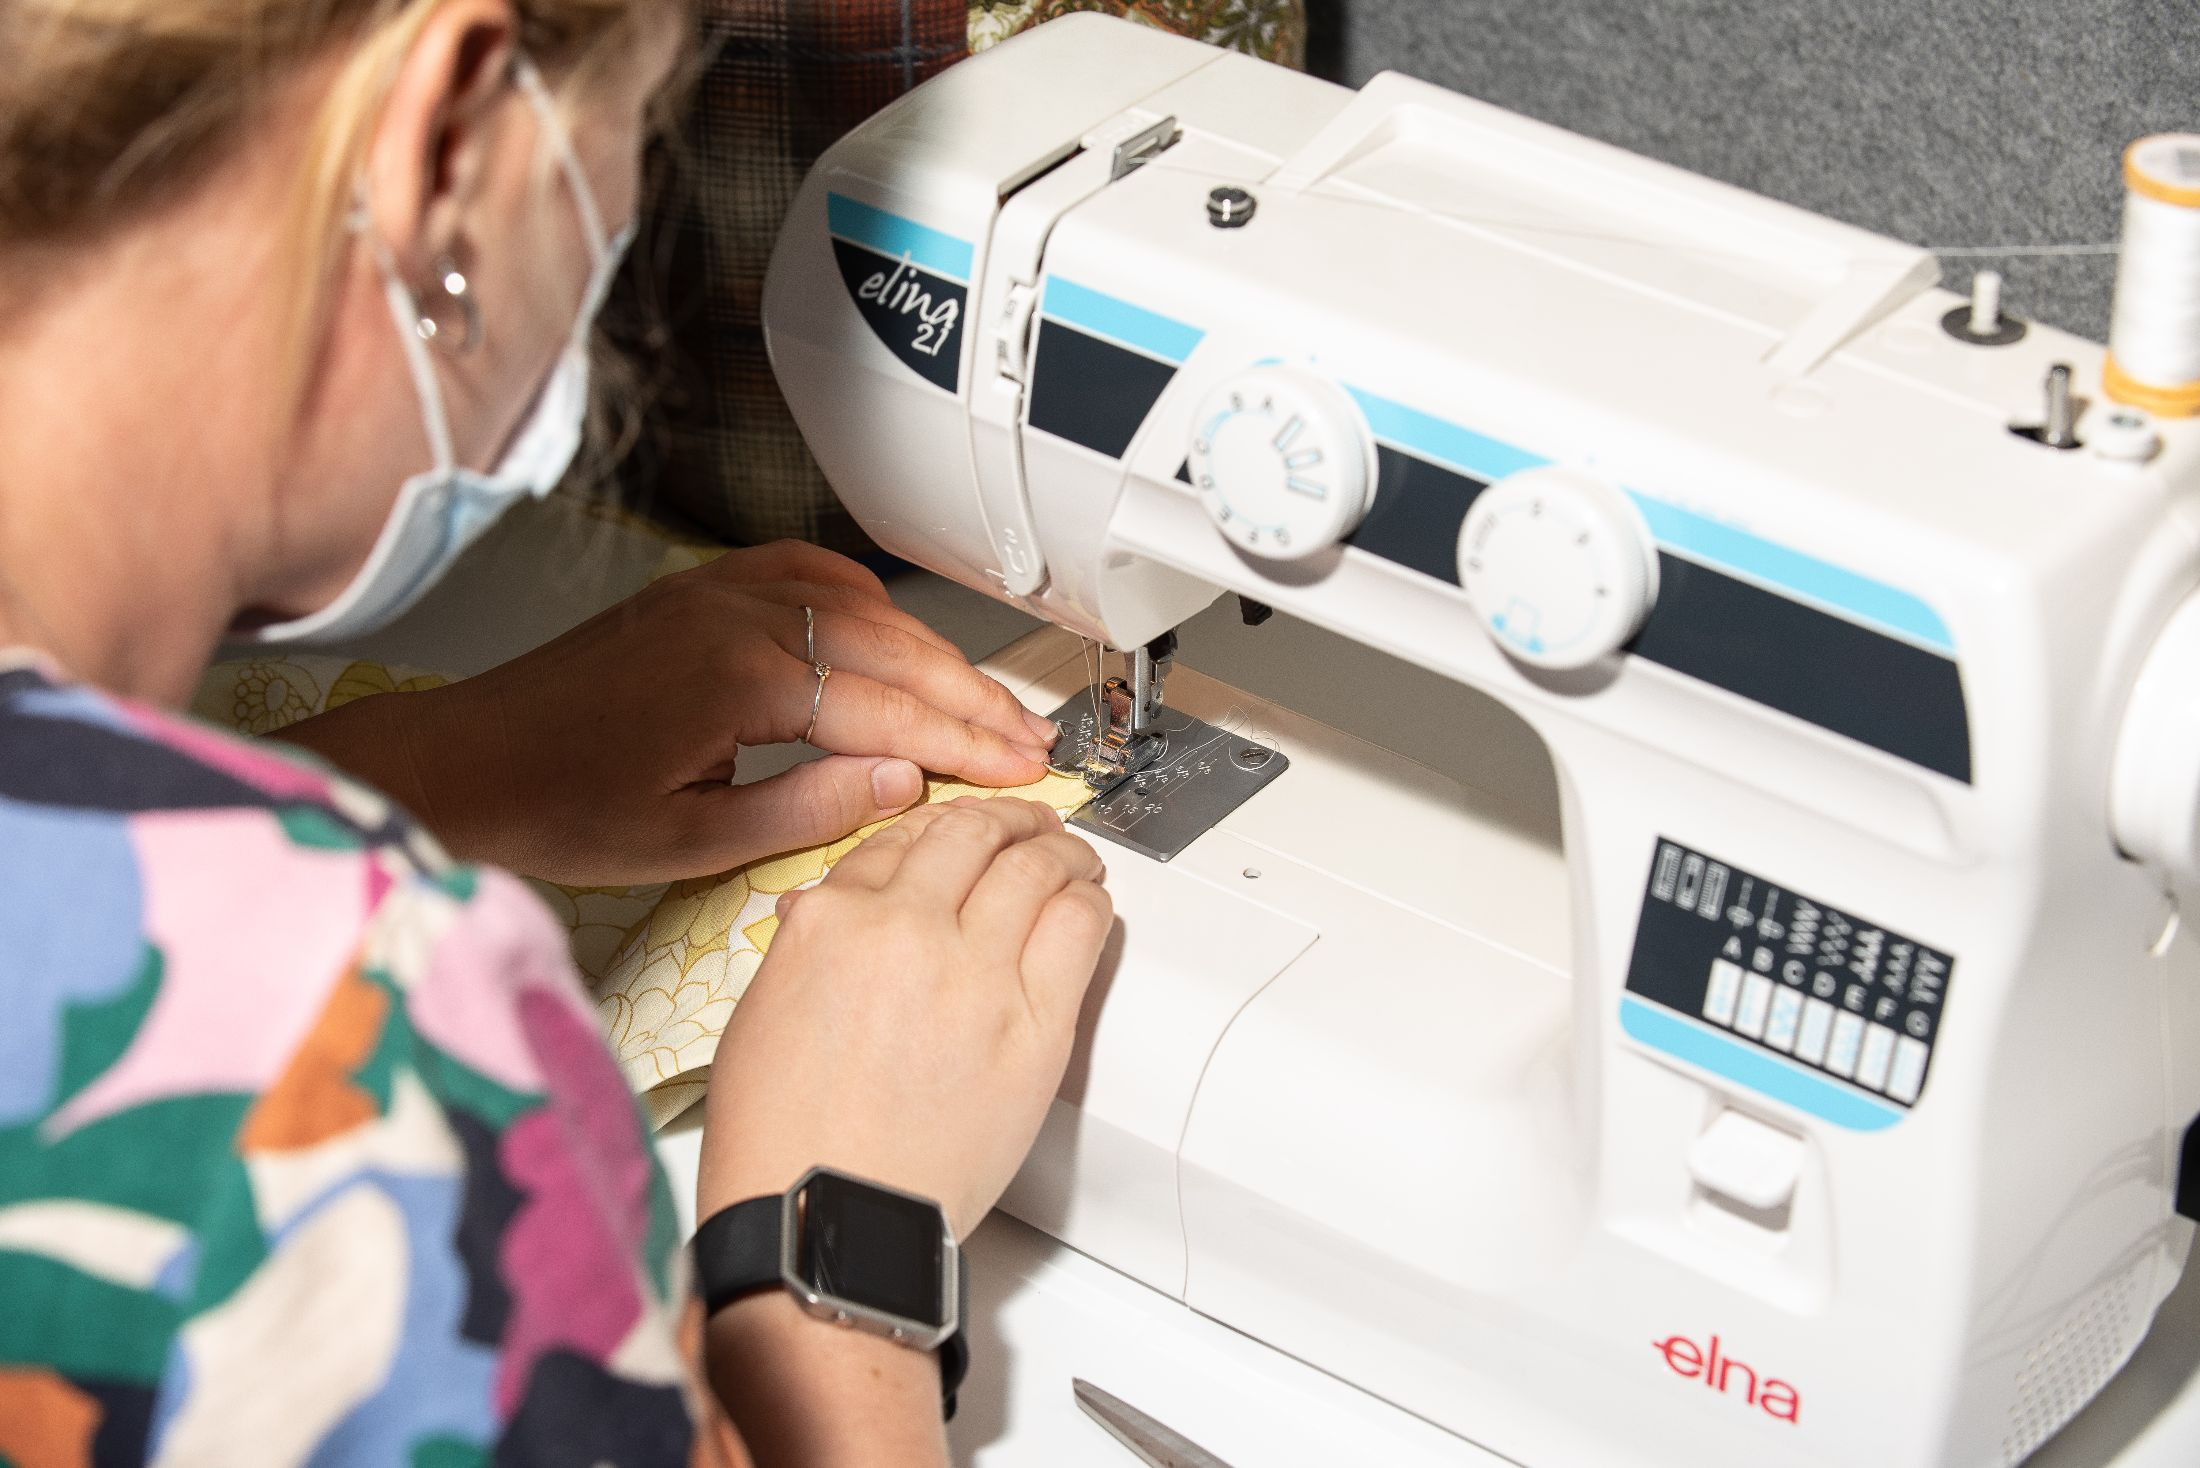 LEARN TO SEW Tuesdays